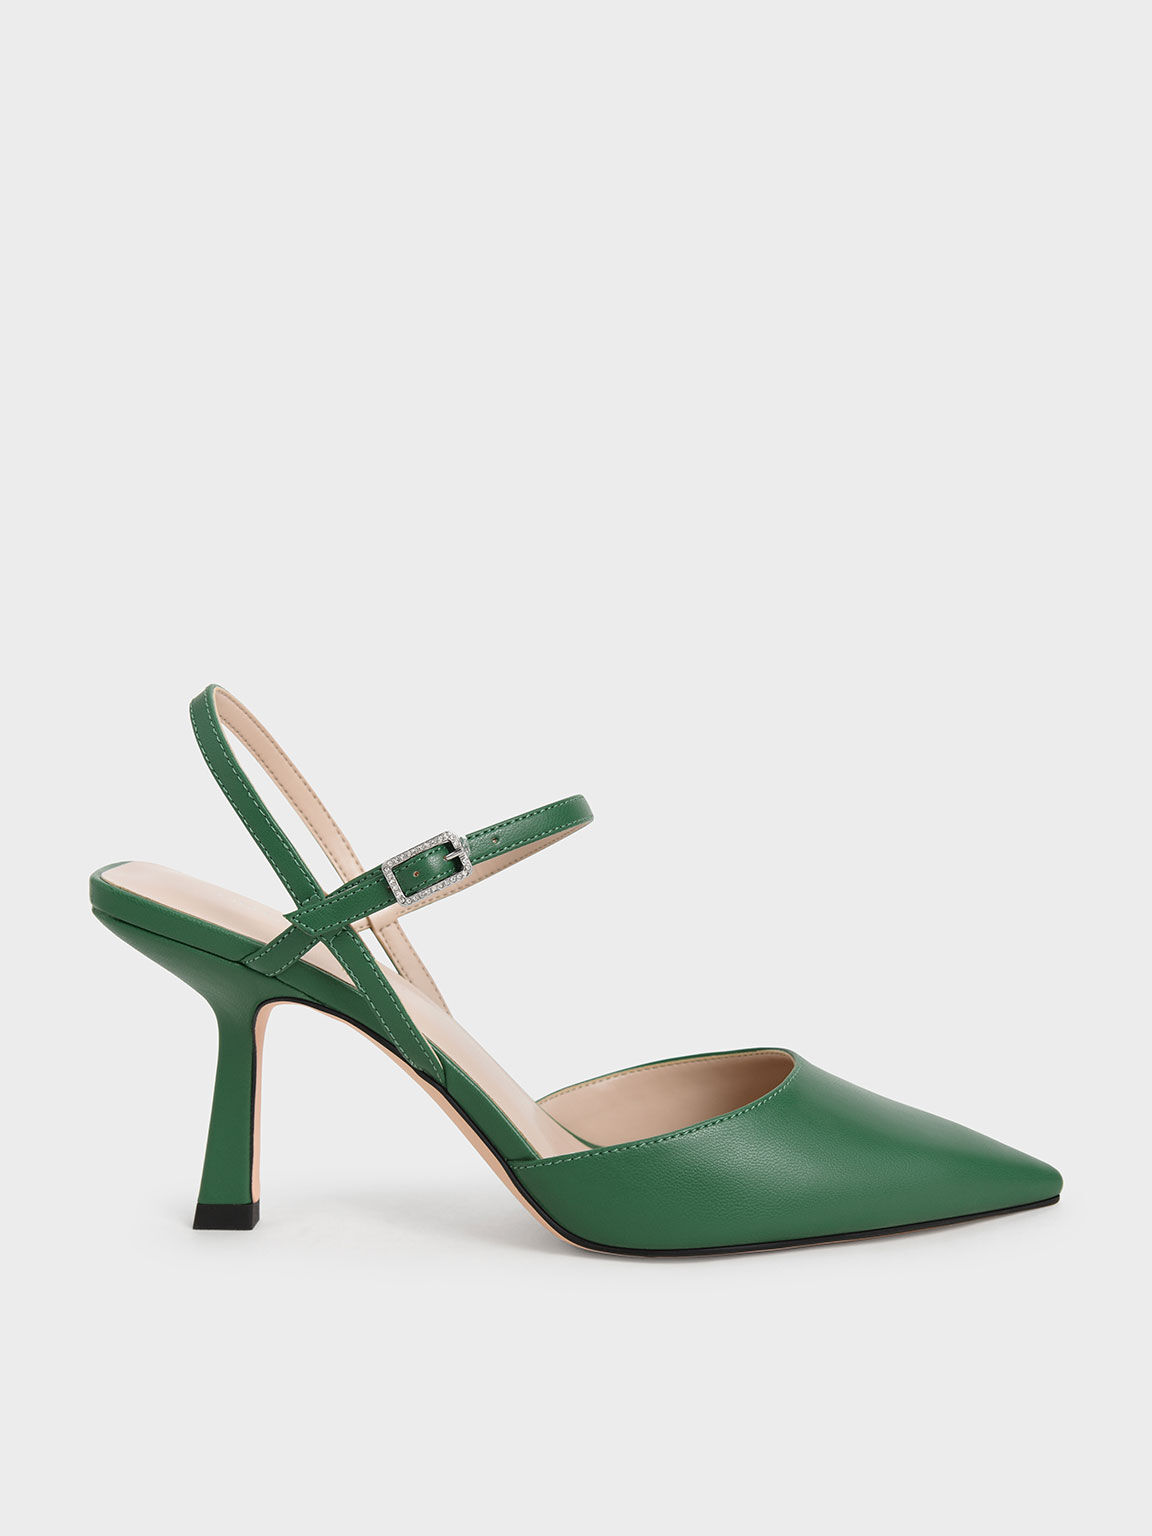 Women's Pumps | Shop Exclusive Styles - CHARLES & KEITH US